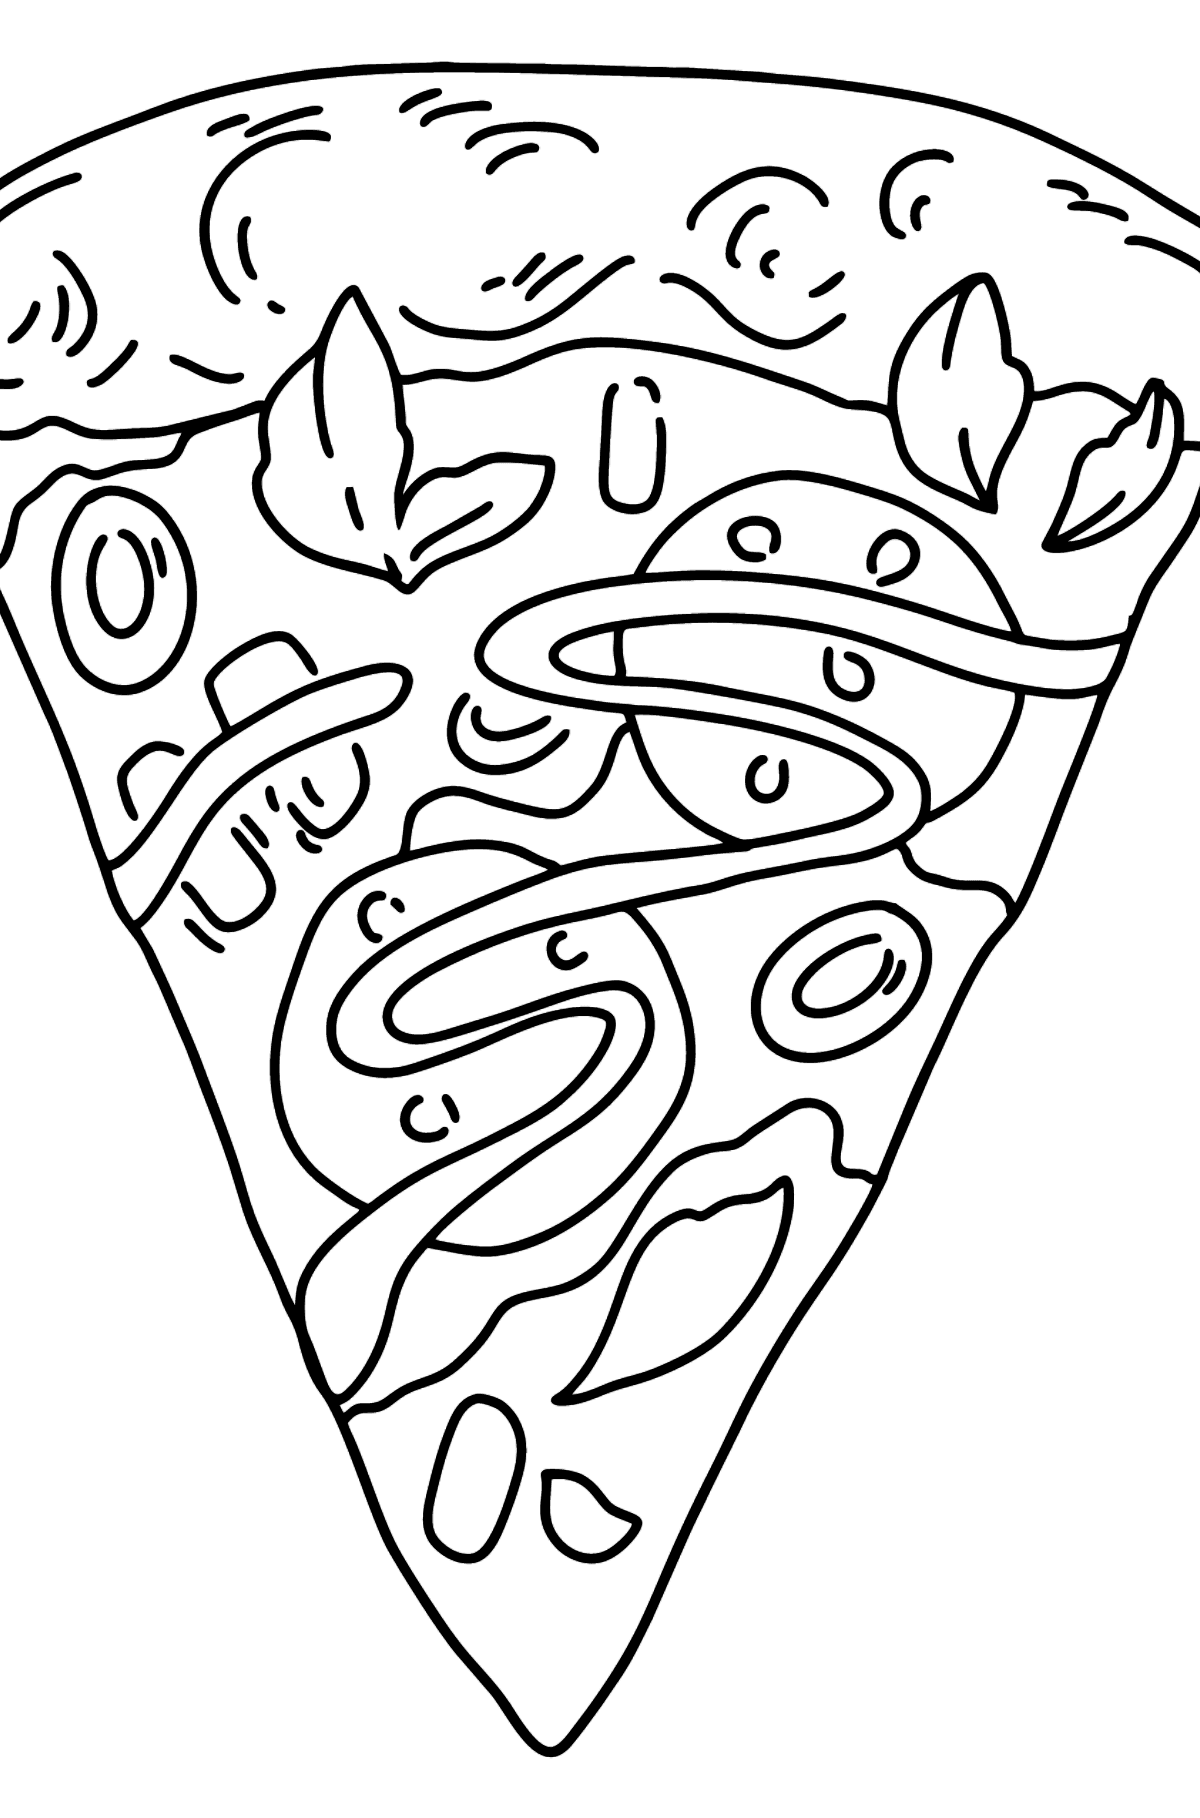 Salami Pizza coloring page - Coloring Pages for Kids